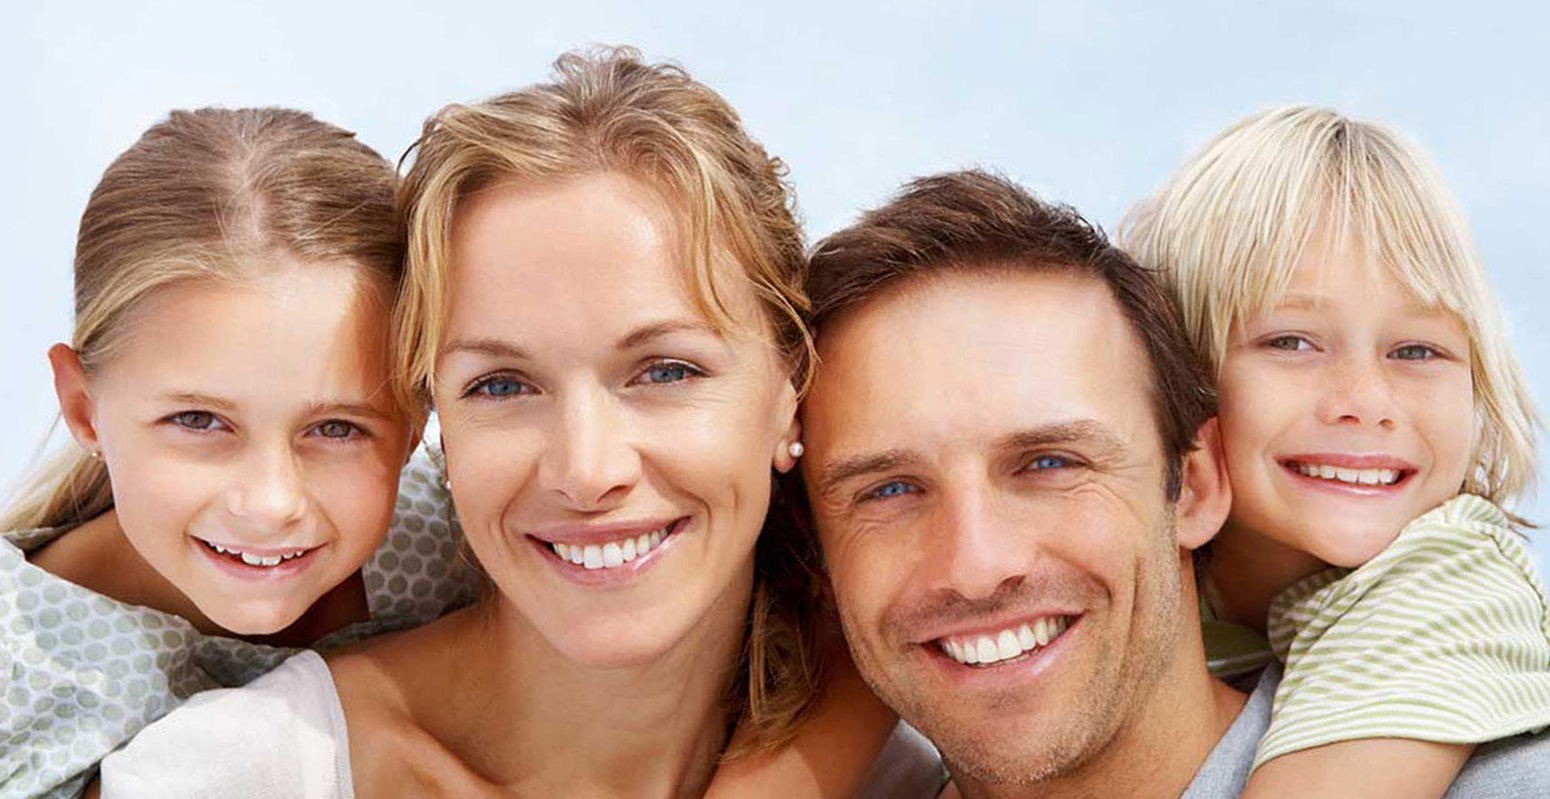 Smile Dentistry: The Painless and Outstanding Method to Get a Beautiful Smile